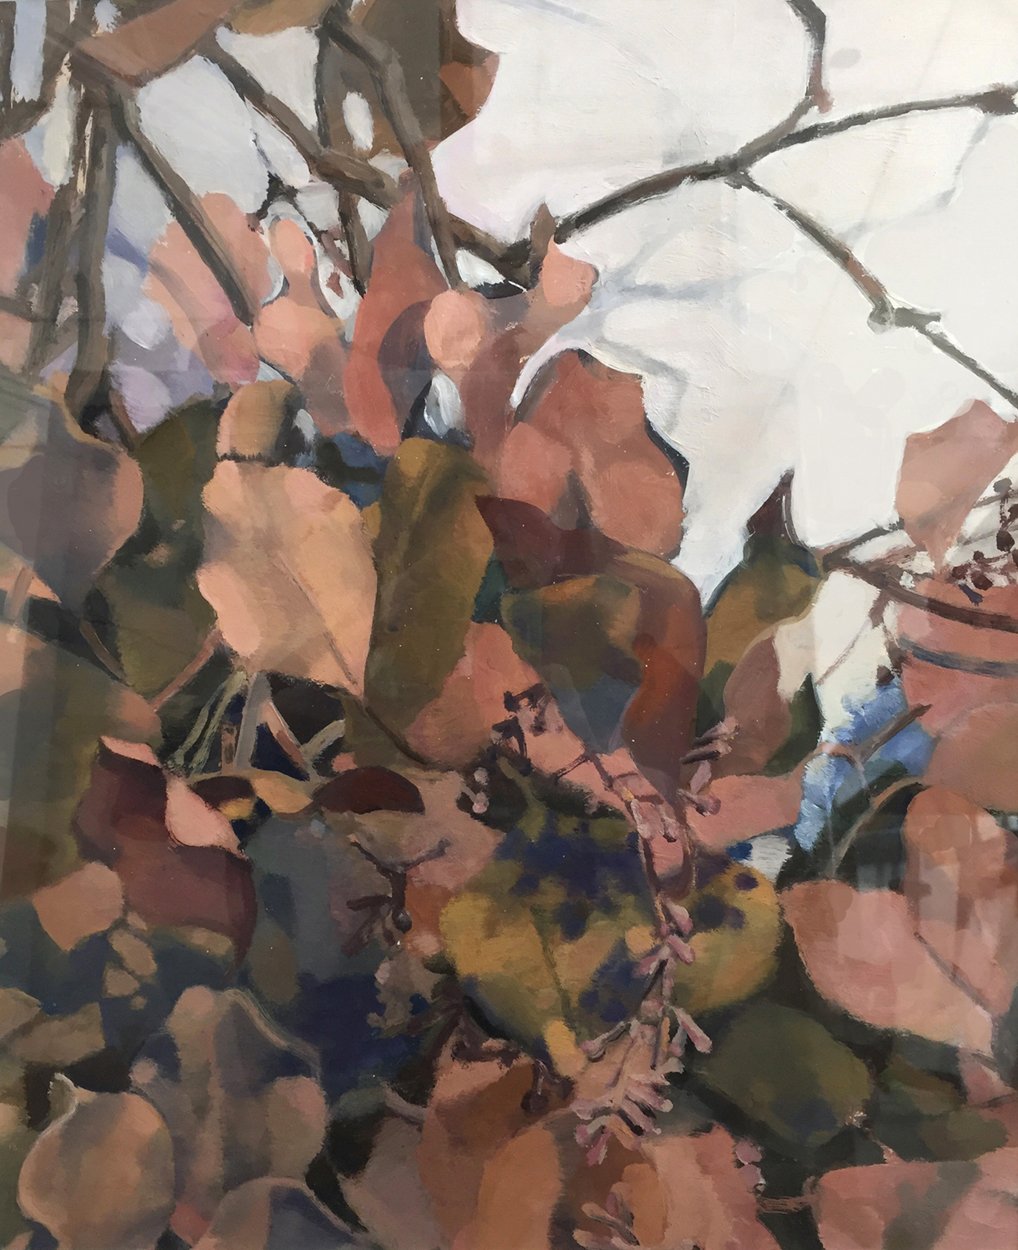 LEAVES ON PAPER  oil on paper  17 x 14" (framed)  2006  Andra Norris Gallery, Burlingame, CA 